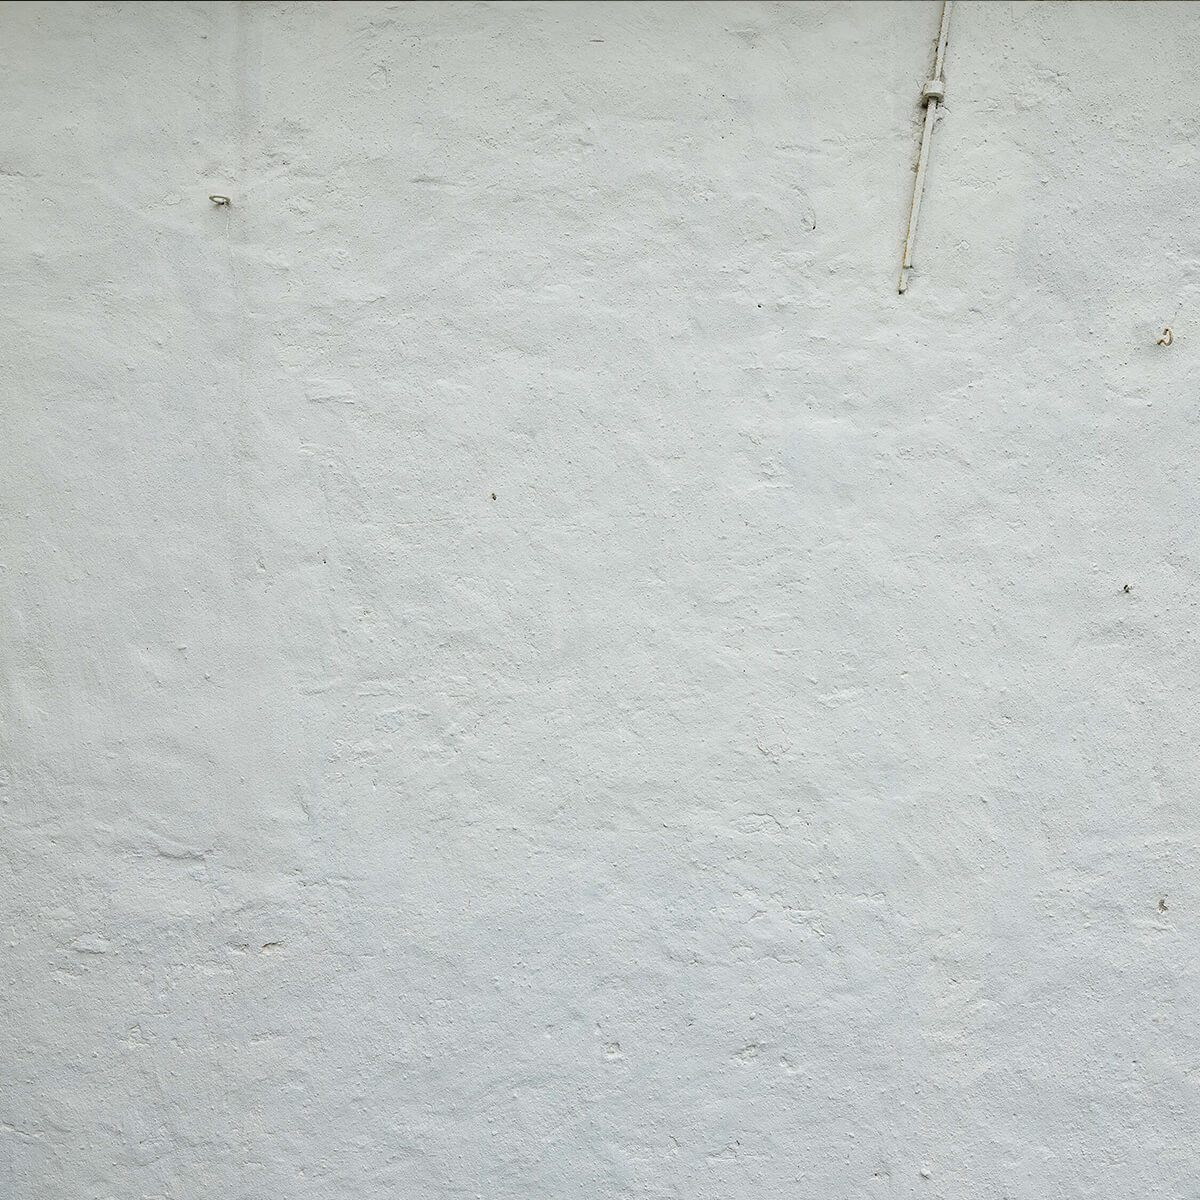 Wall with white stucco